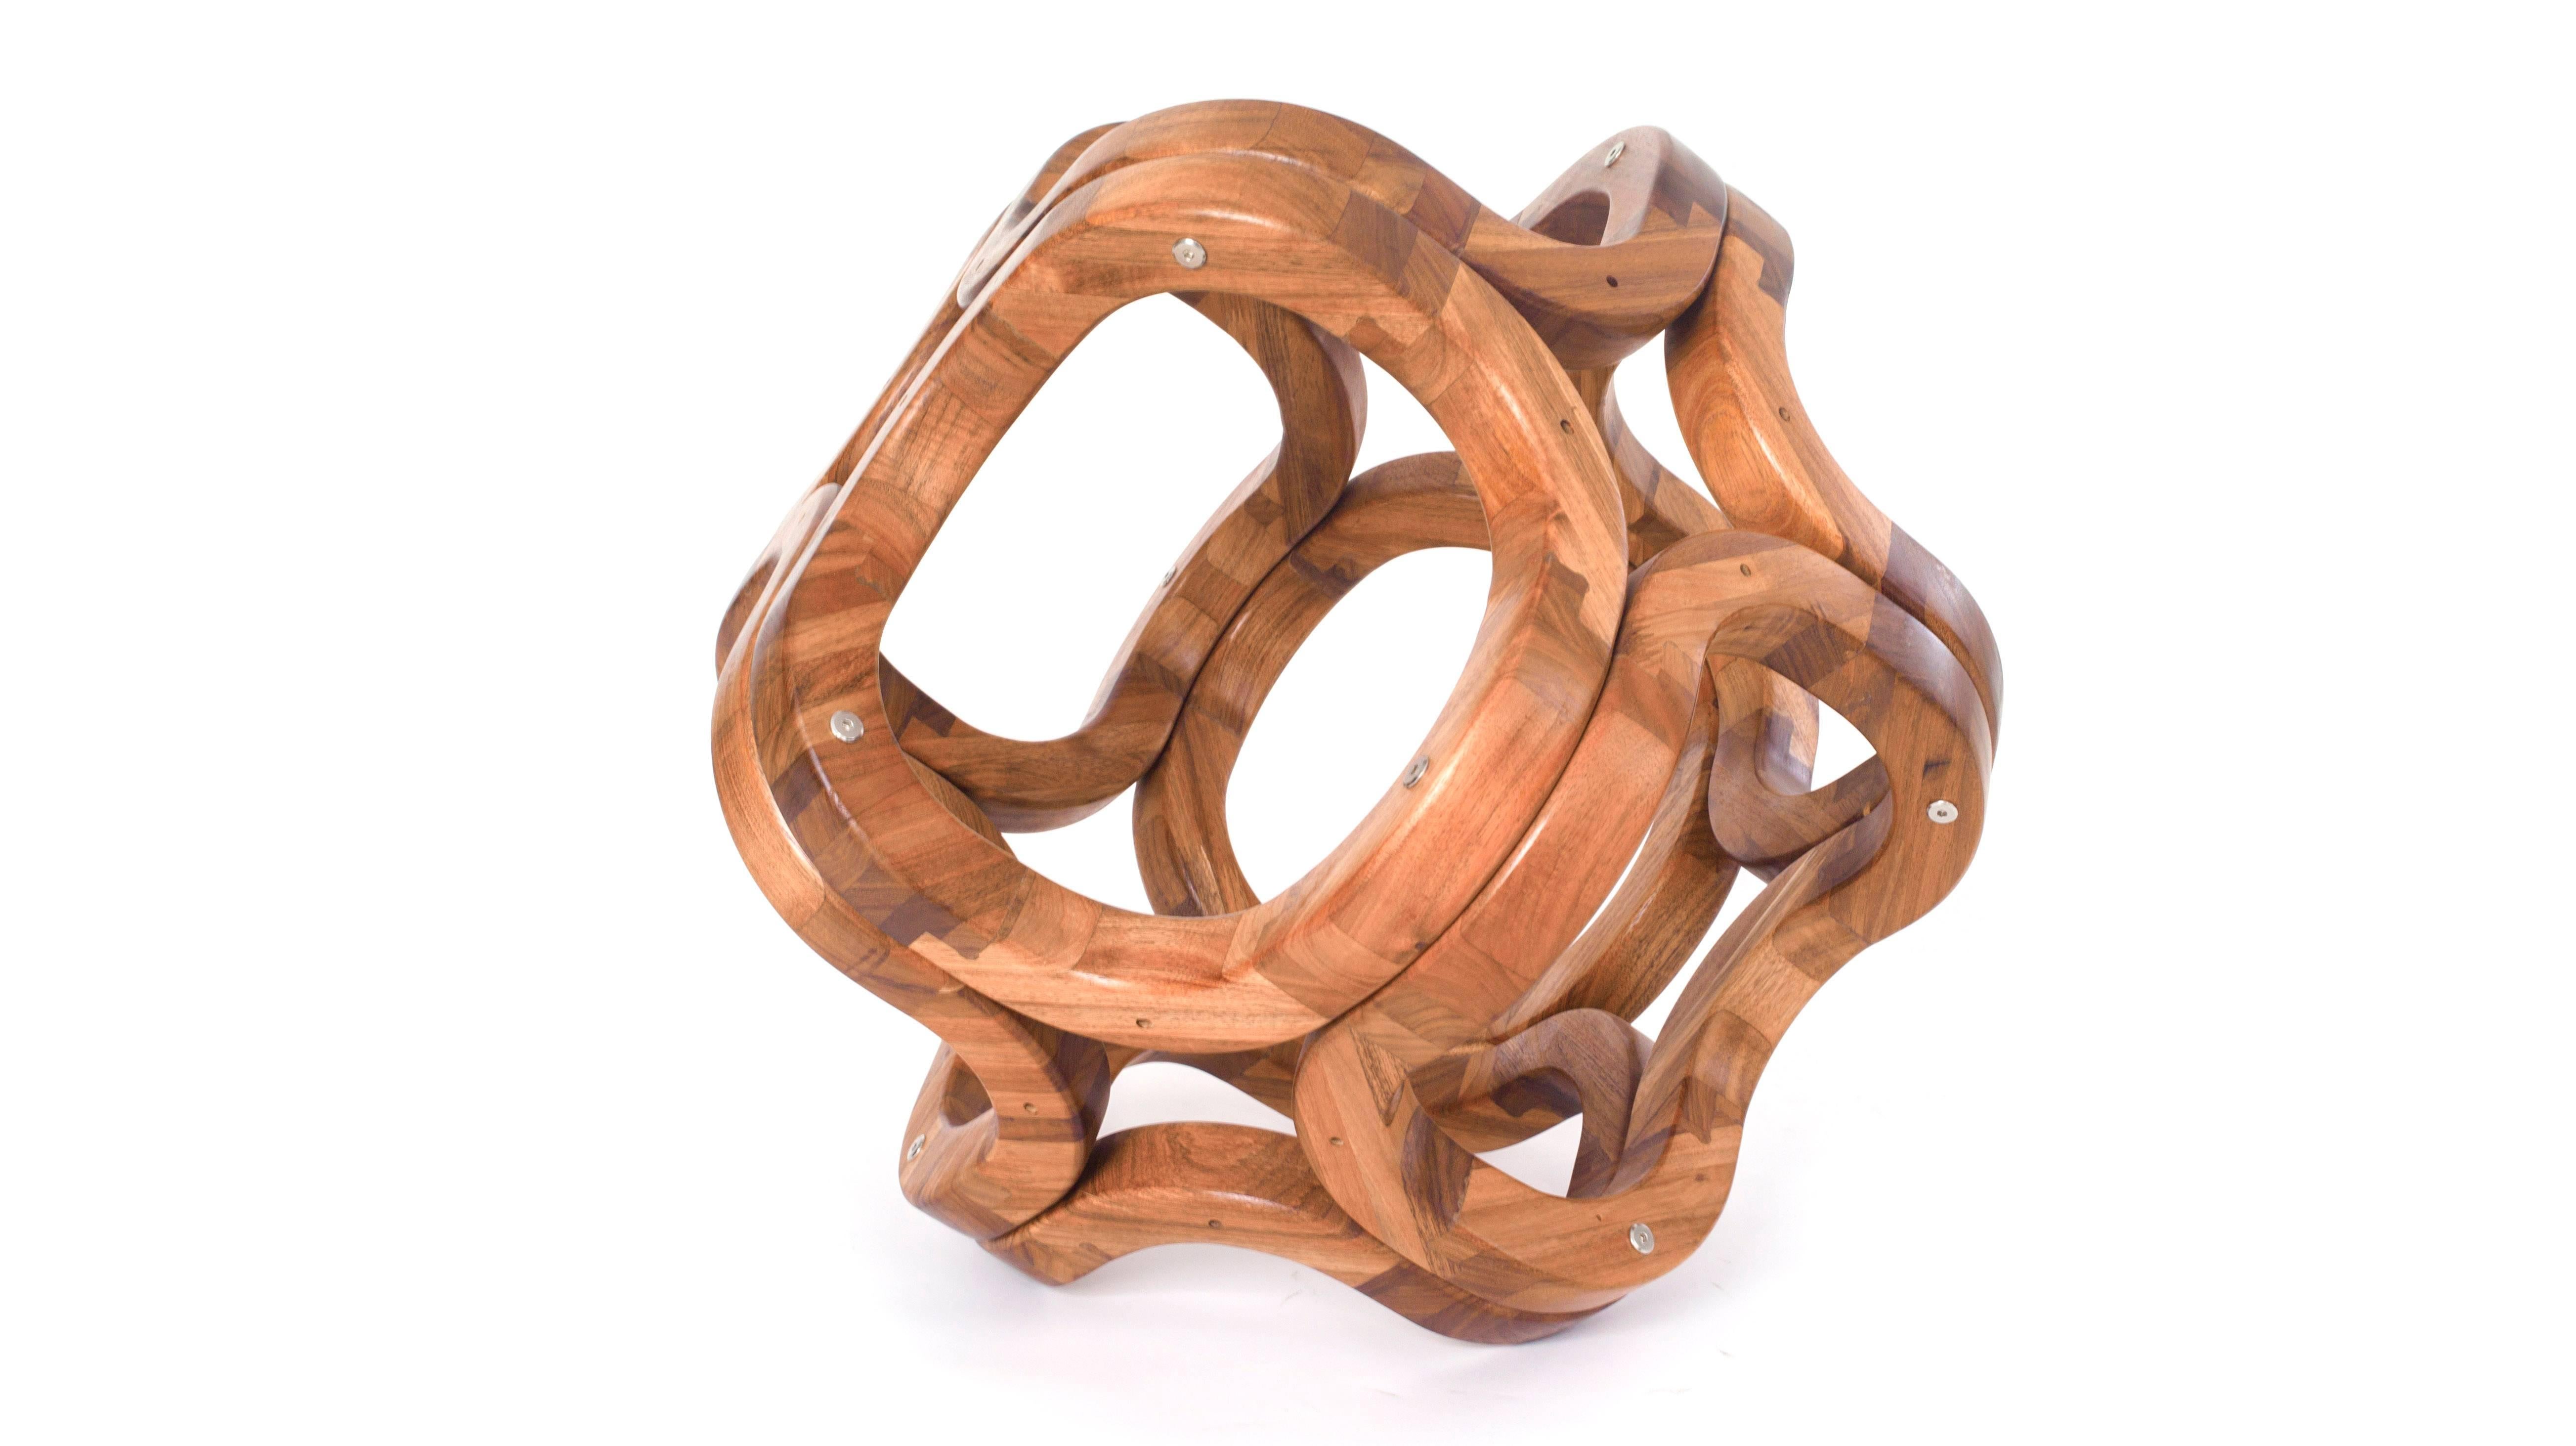 Hand-Crafted Contemporary Mexican Sculpture in Handcrafted Tzalam Wood Geometric Octahedron 